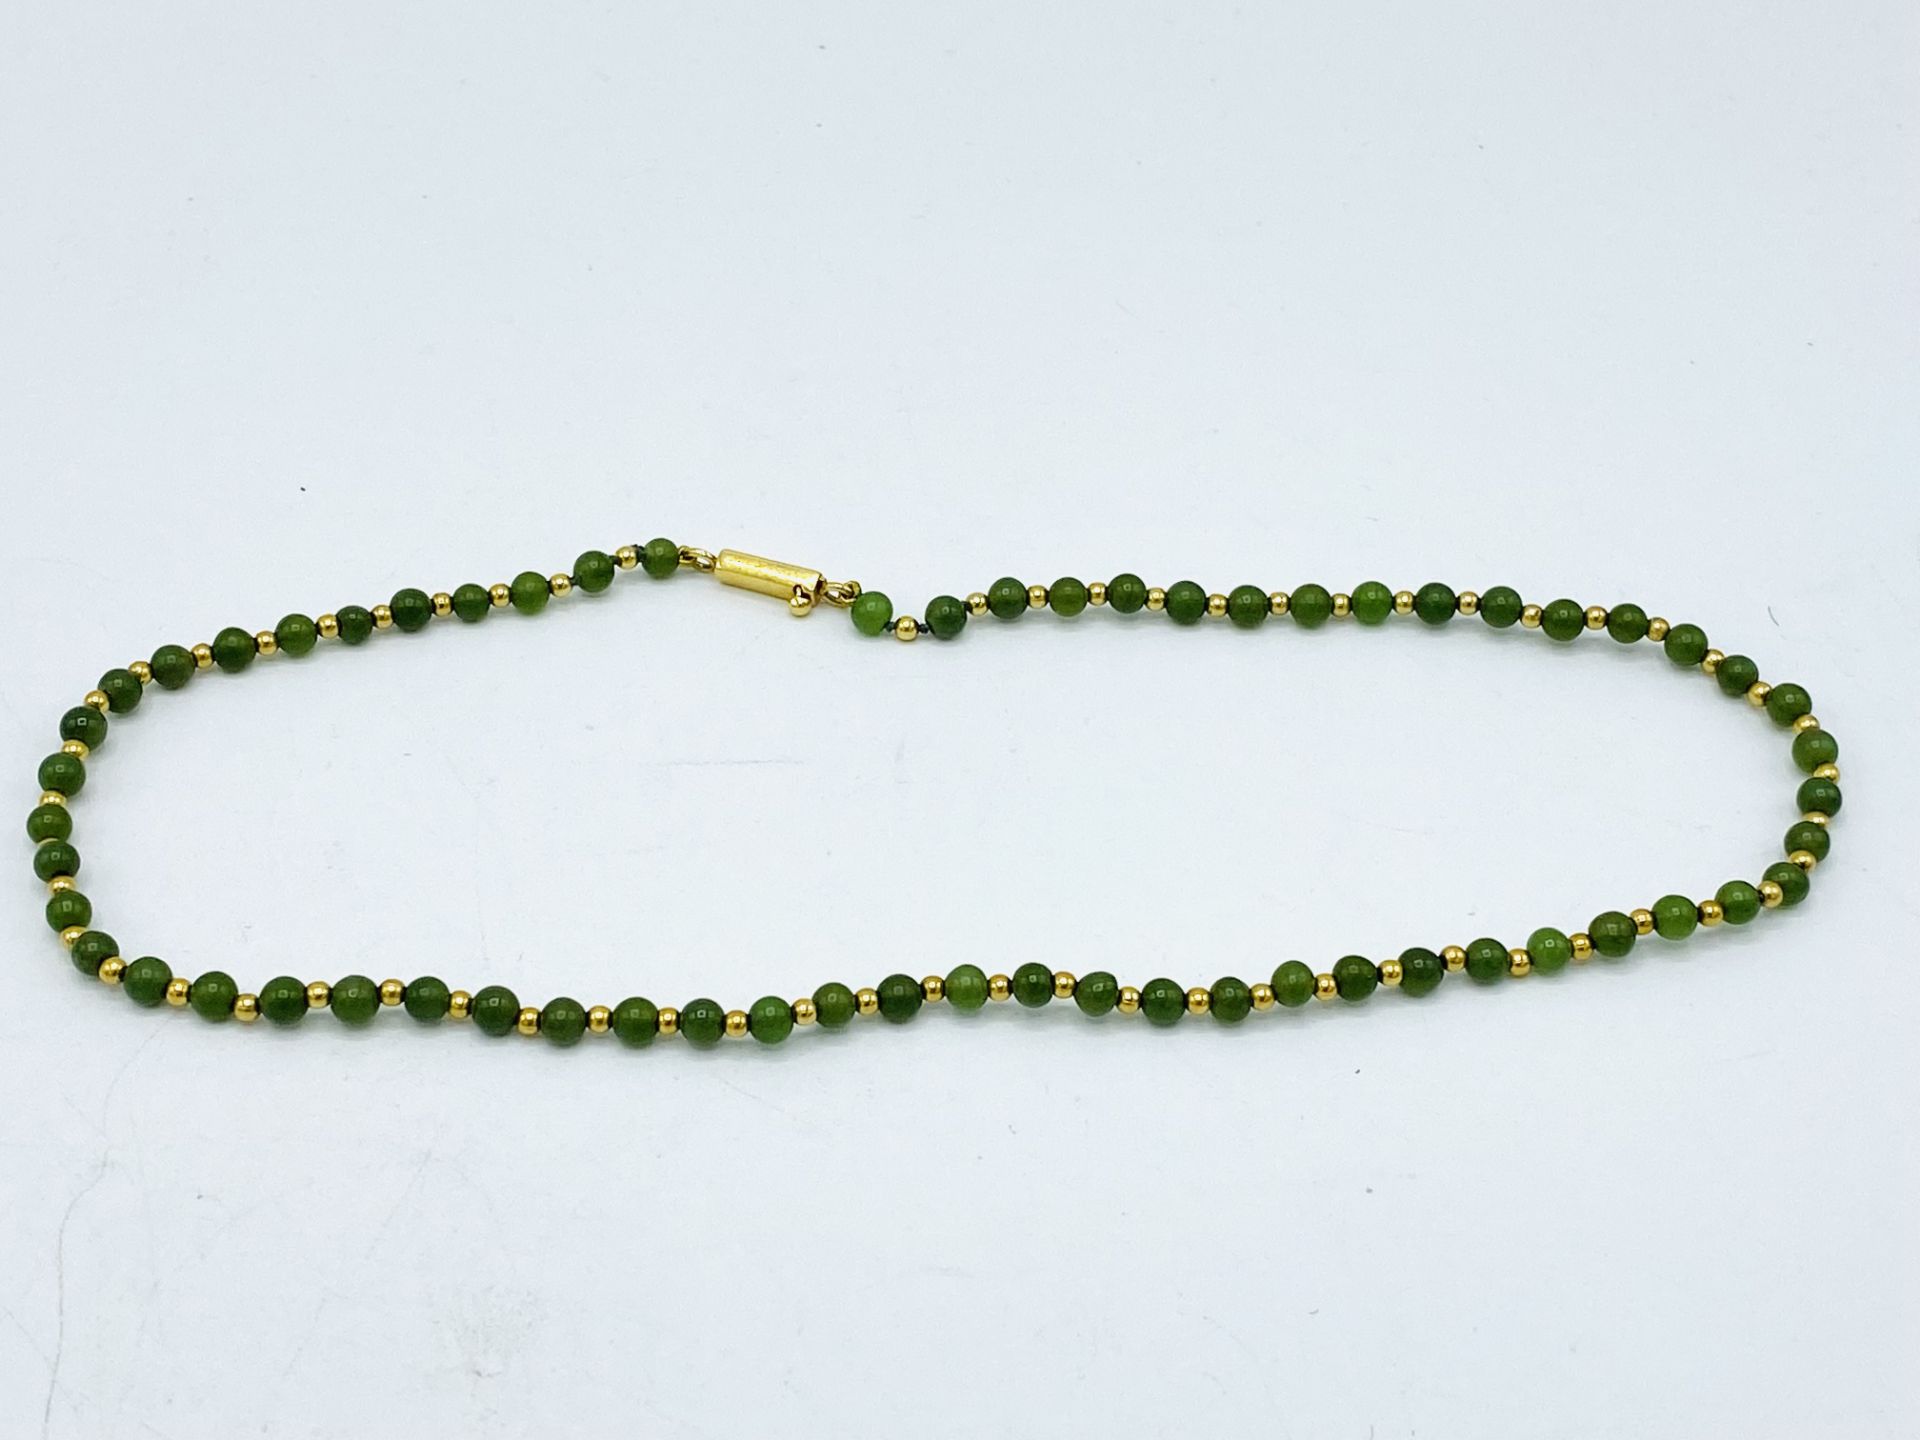 18ct gold and jade bead necklace - Image 4 of 4